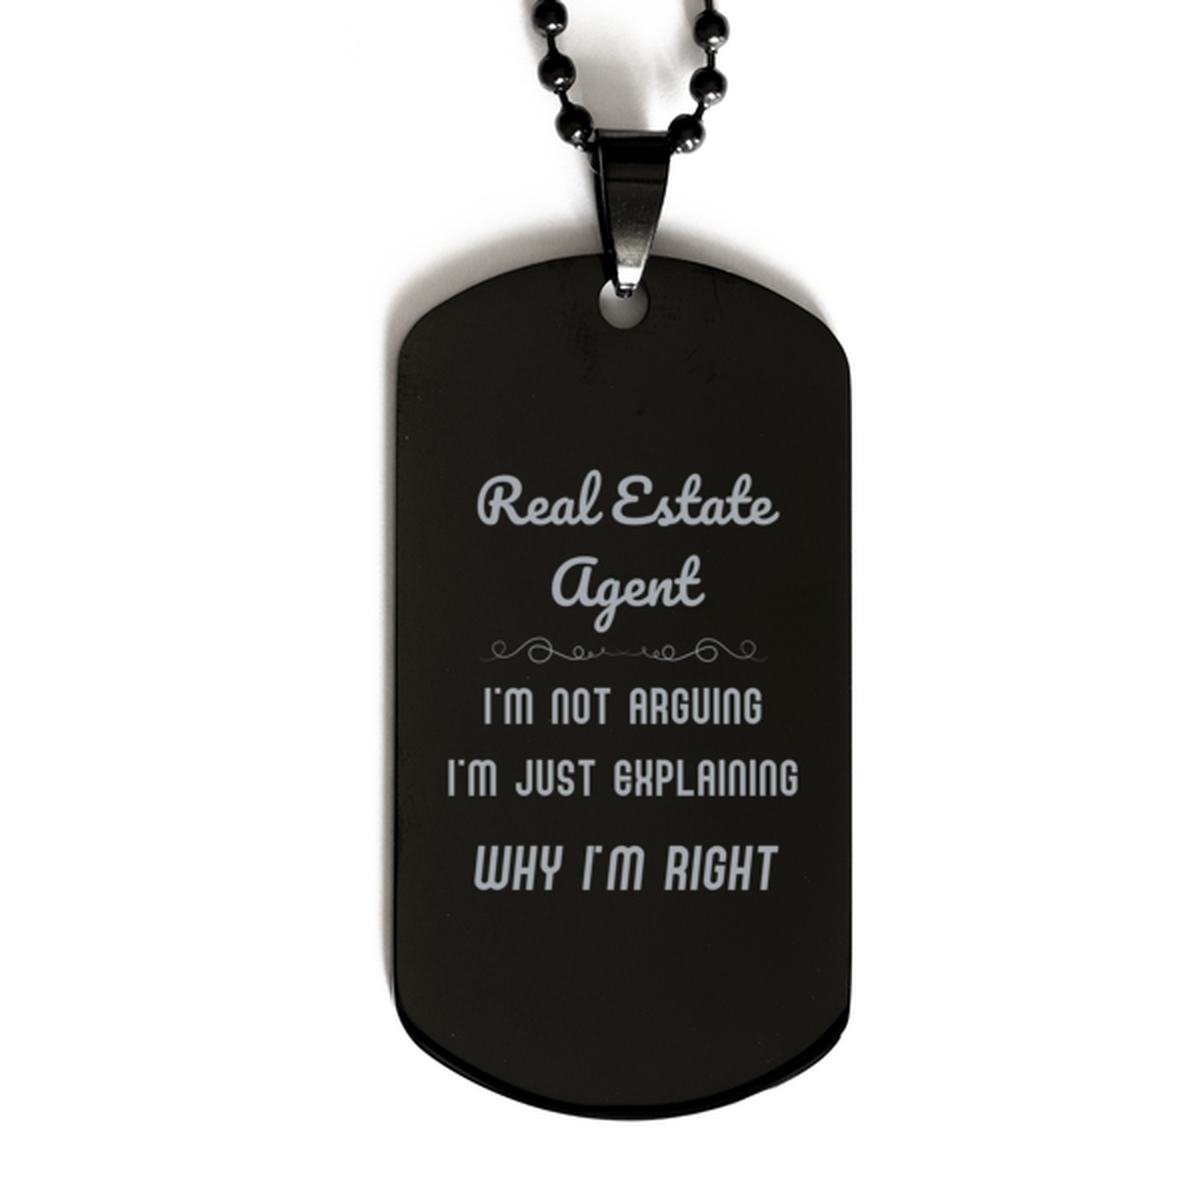 Real Estate Agent I'm not Arguing. I'm Just Explaining Why I'm RIGHT Black Dog Tag, Funny Saying Quote Real Estate Agent Gifts For Real Estate Agent Graduation Birthday Christmas Gifts for Men Women Coworker